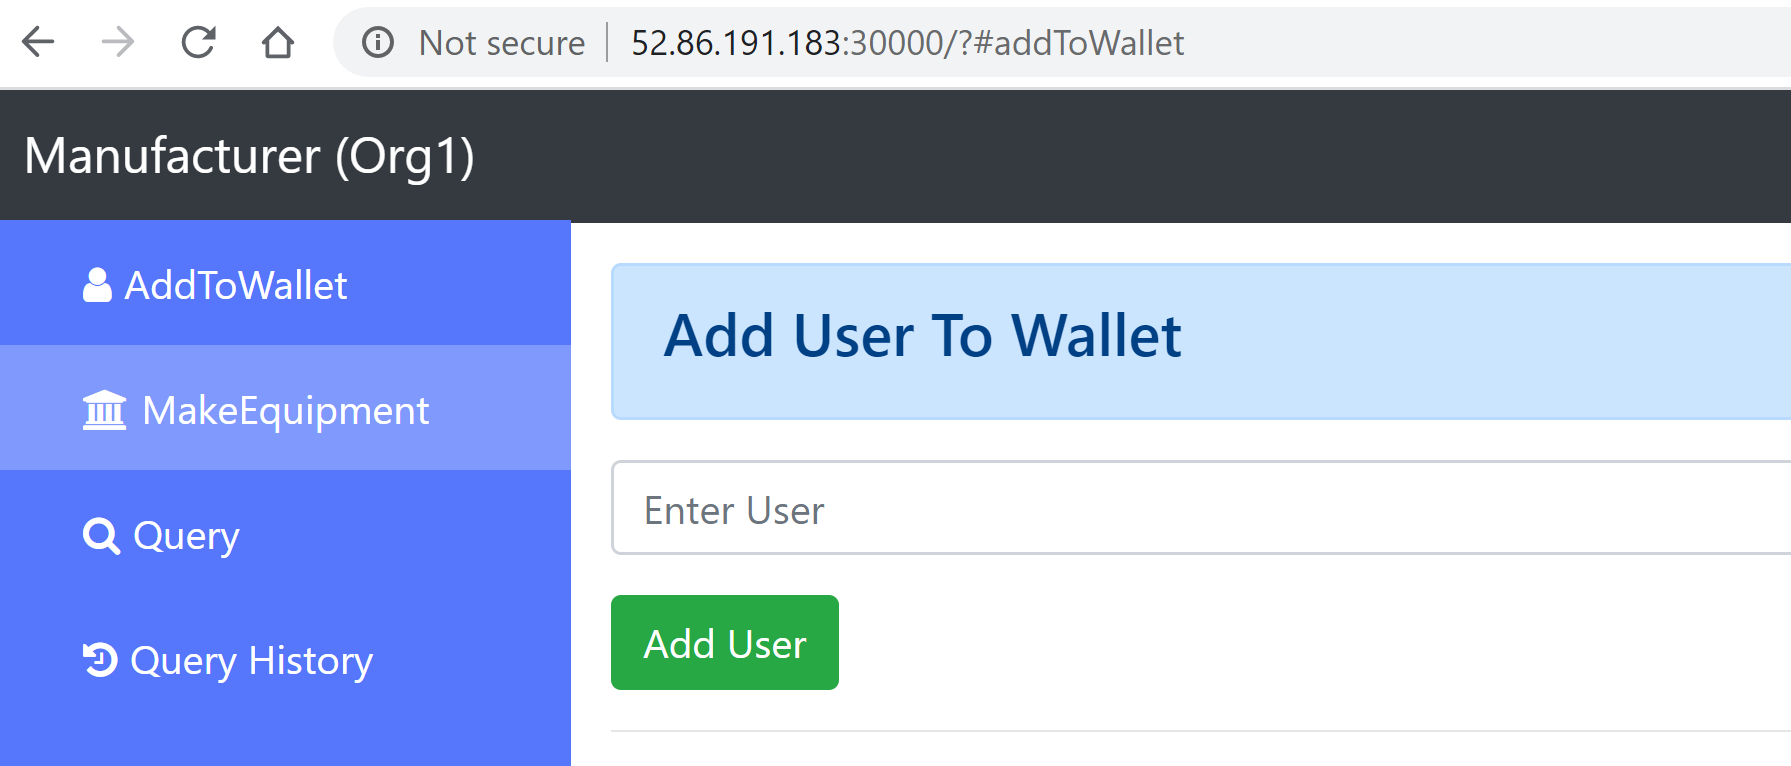 11. Add user to wallet for manufacturer